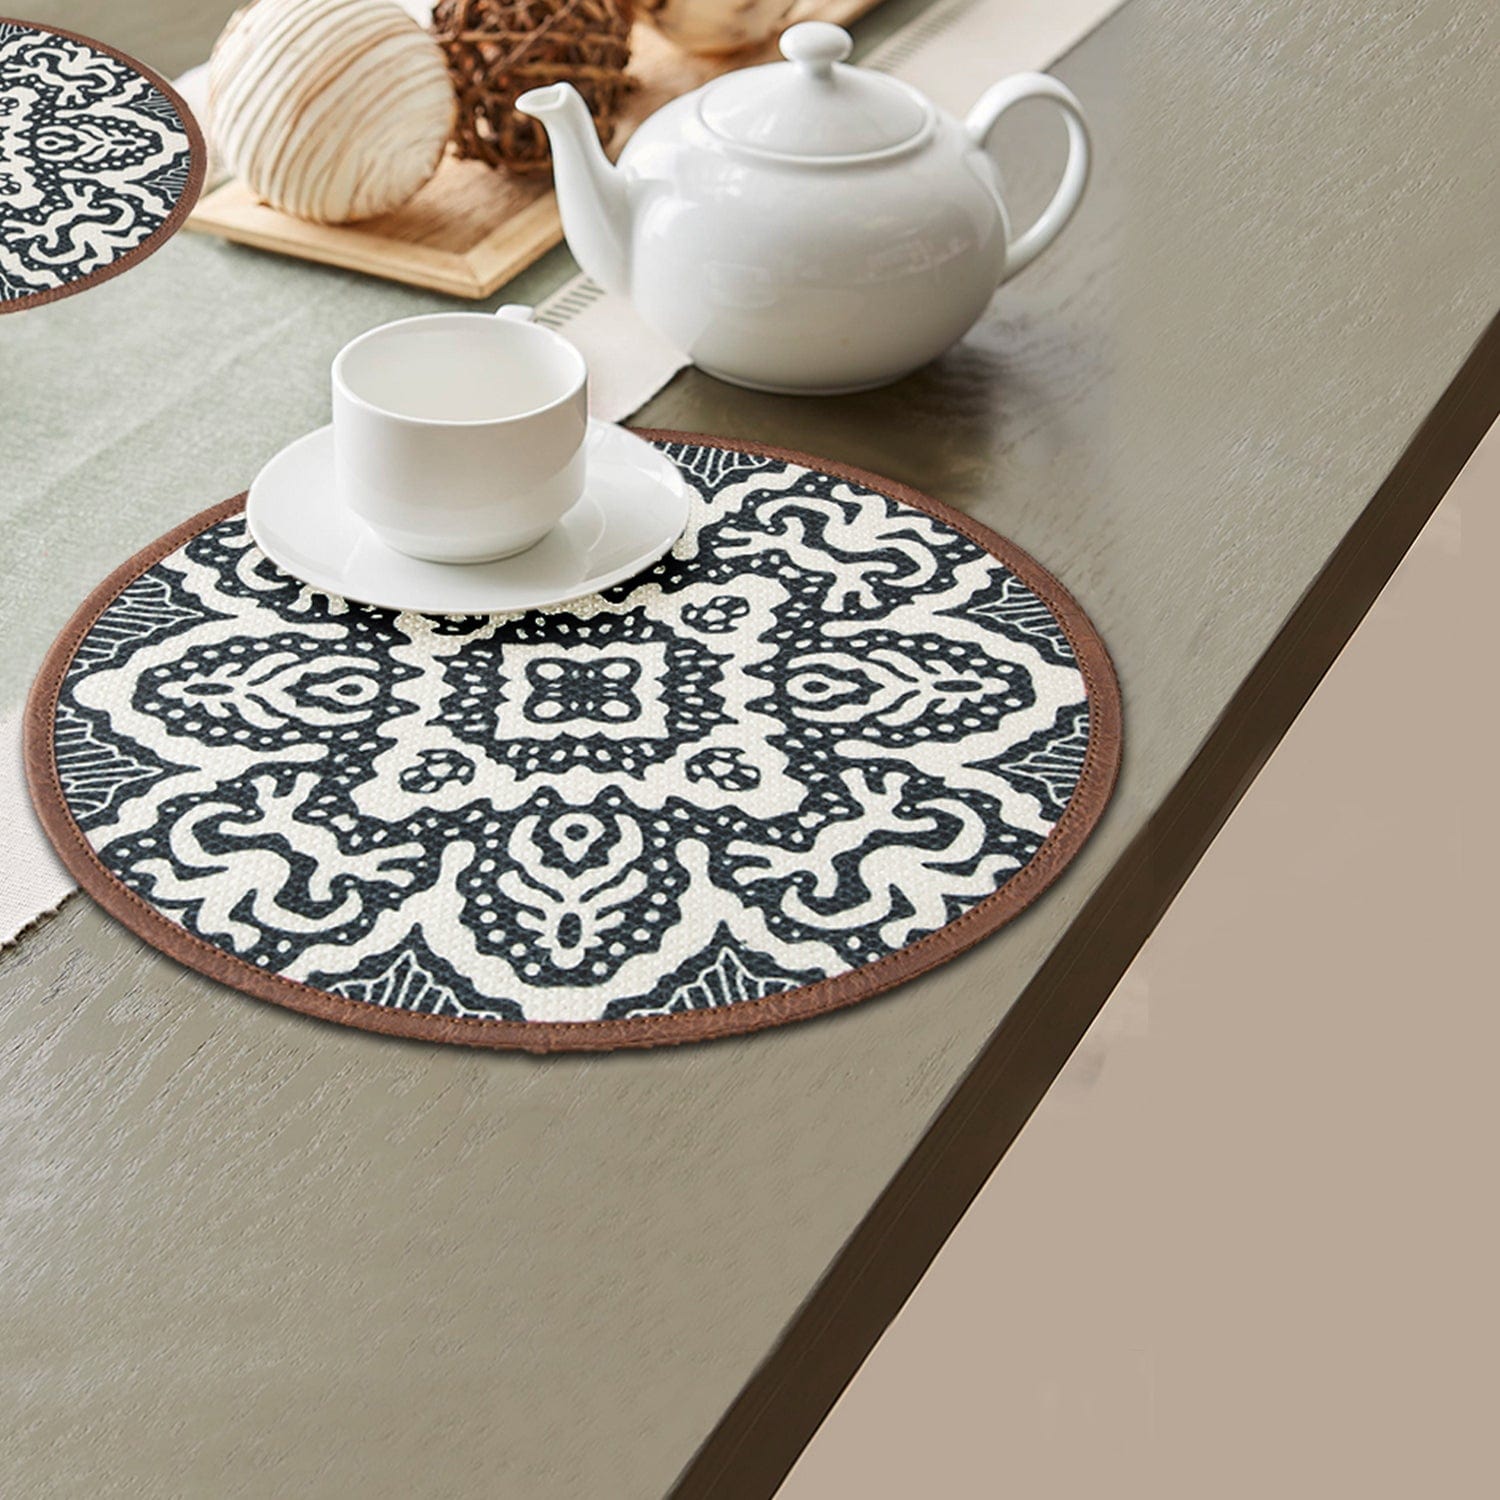 Mona B Set of 2 Printed Mosaic Placemats, 13 INCH Round, Best for Bed-Side Table/Center Table, Dining Table/Shelves (Medallion) - Placemat by Mona-B - Backpack, Flat30, New Arrivals, Sale, 